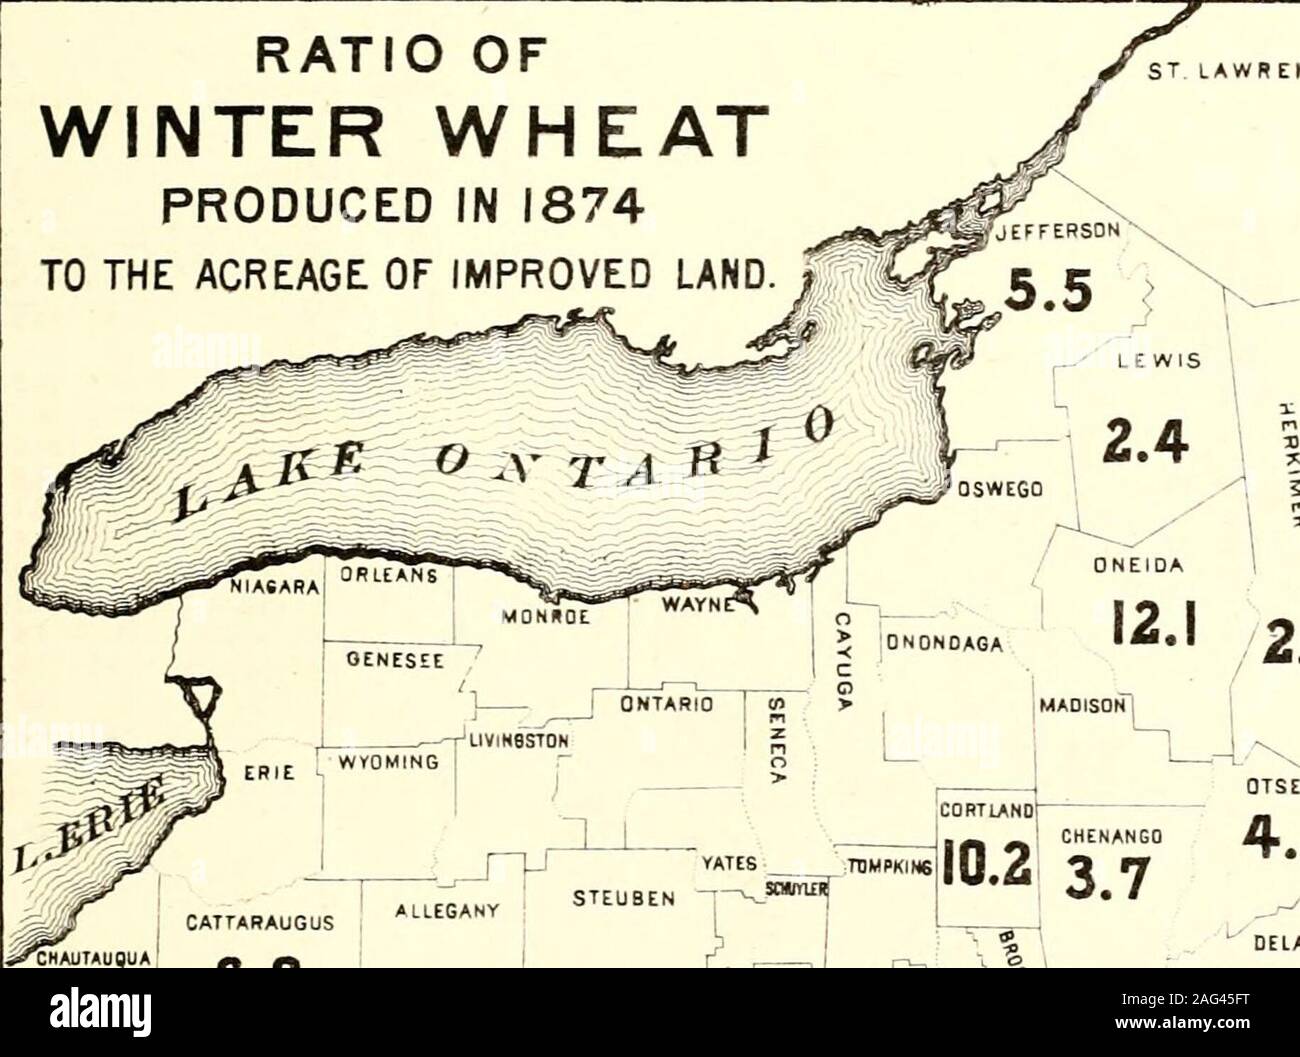 . Census of the state of New York for 1875. RATIO OF WINTER WHEAT PRODUCED IN 1874 TO THE ACREAGE OF IMPROVED LAND. ST LAWRENCE 1 1. Stock Photo